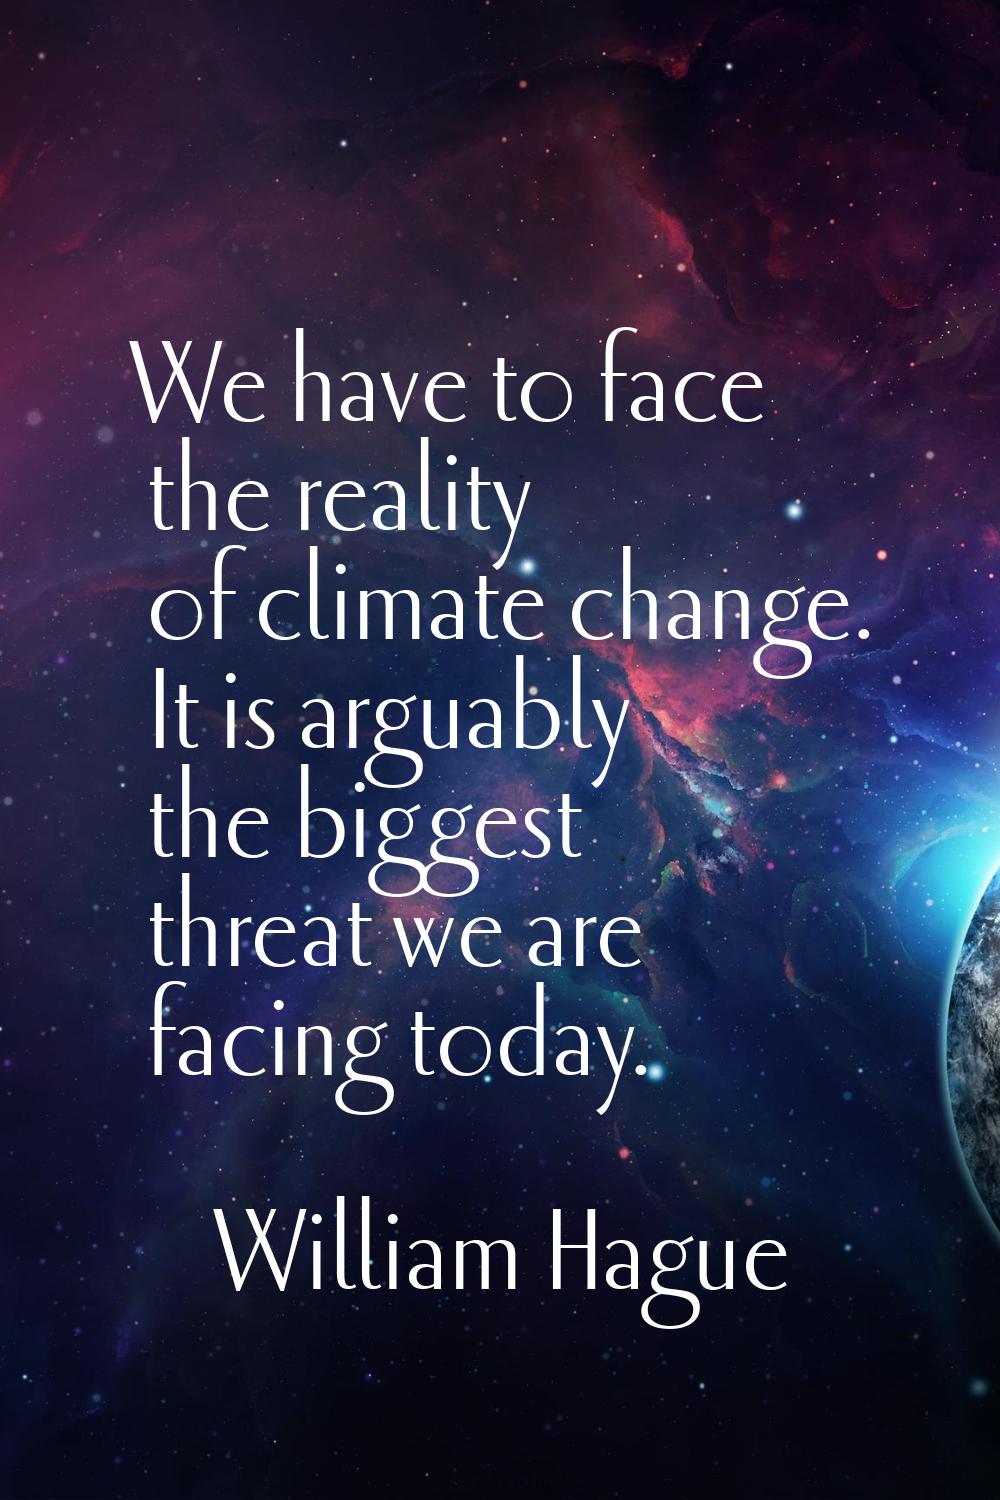 We have to face the reality of climate change. It is arguably the biggest threat we are facing toda